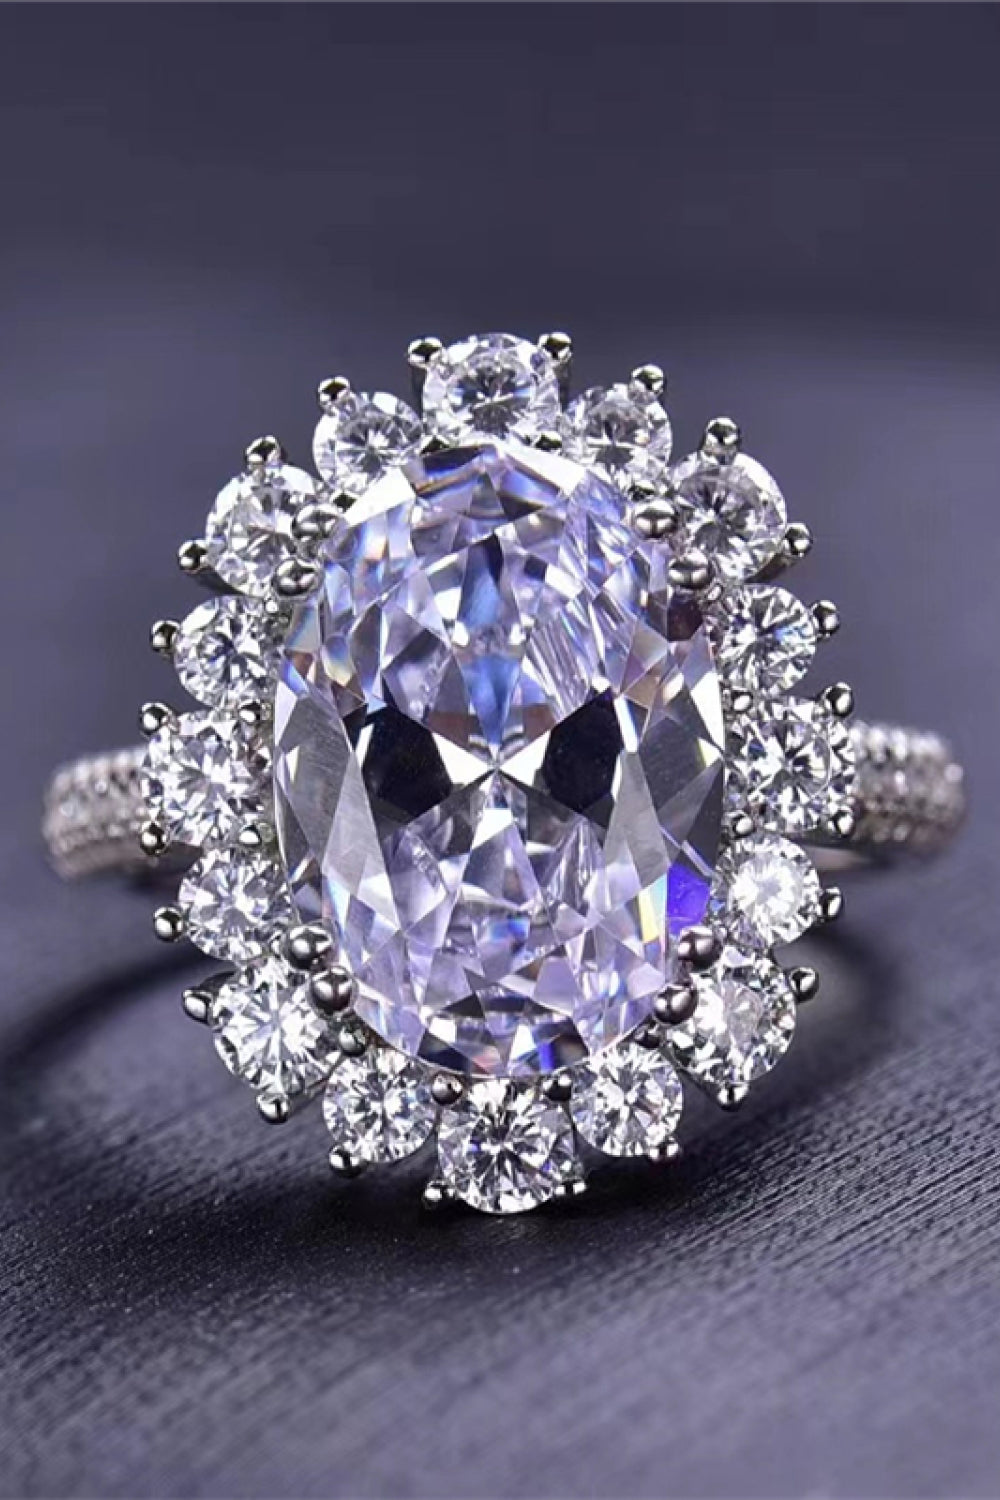 8 Carat Oval Moissanite Ring - Tophatter Shopping Deals